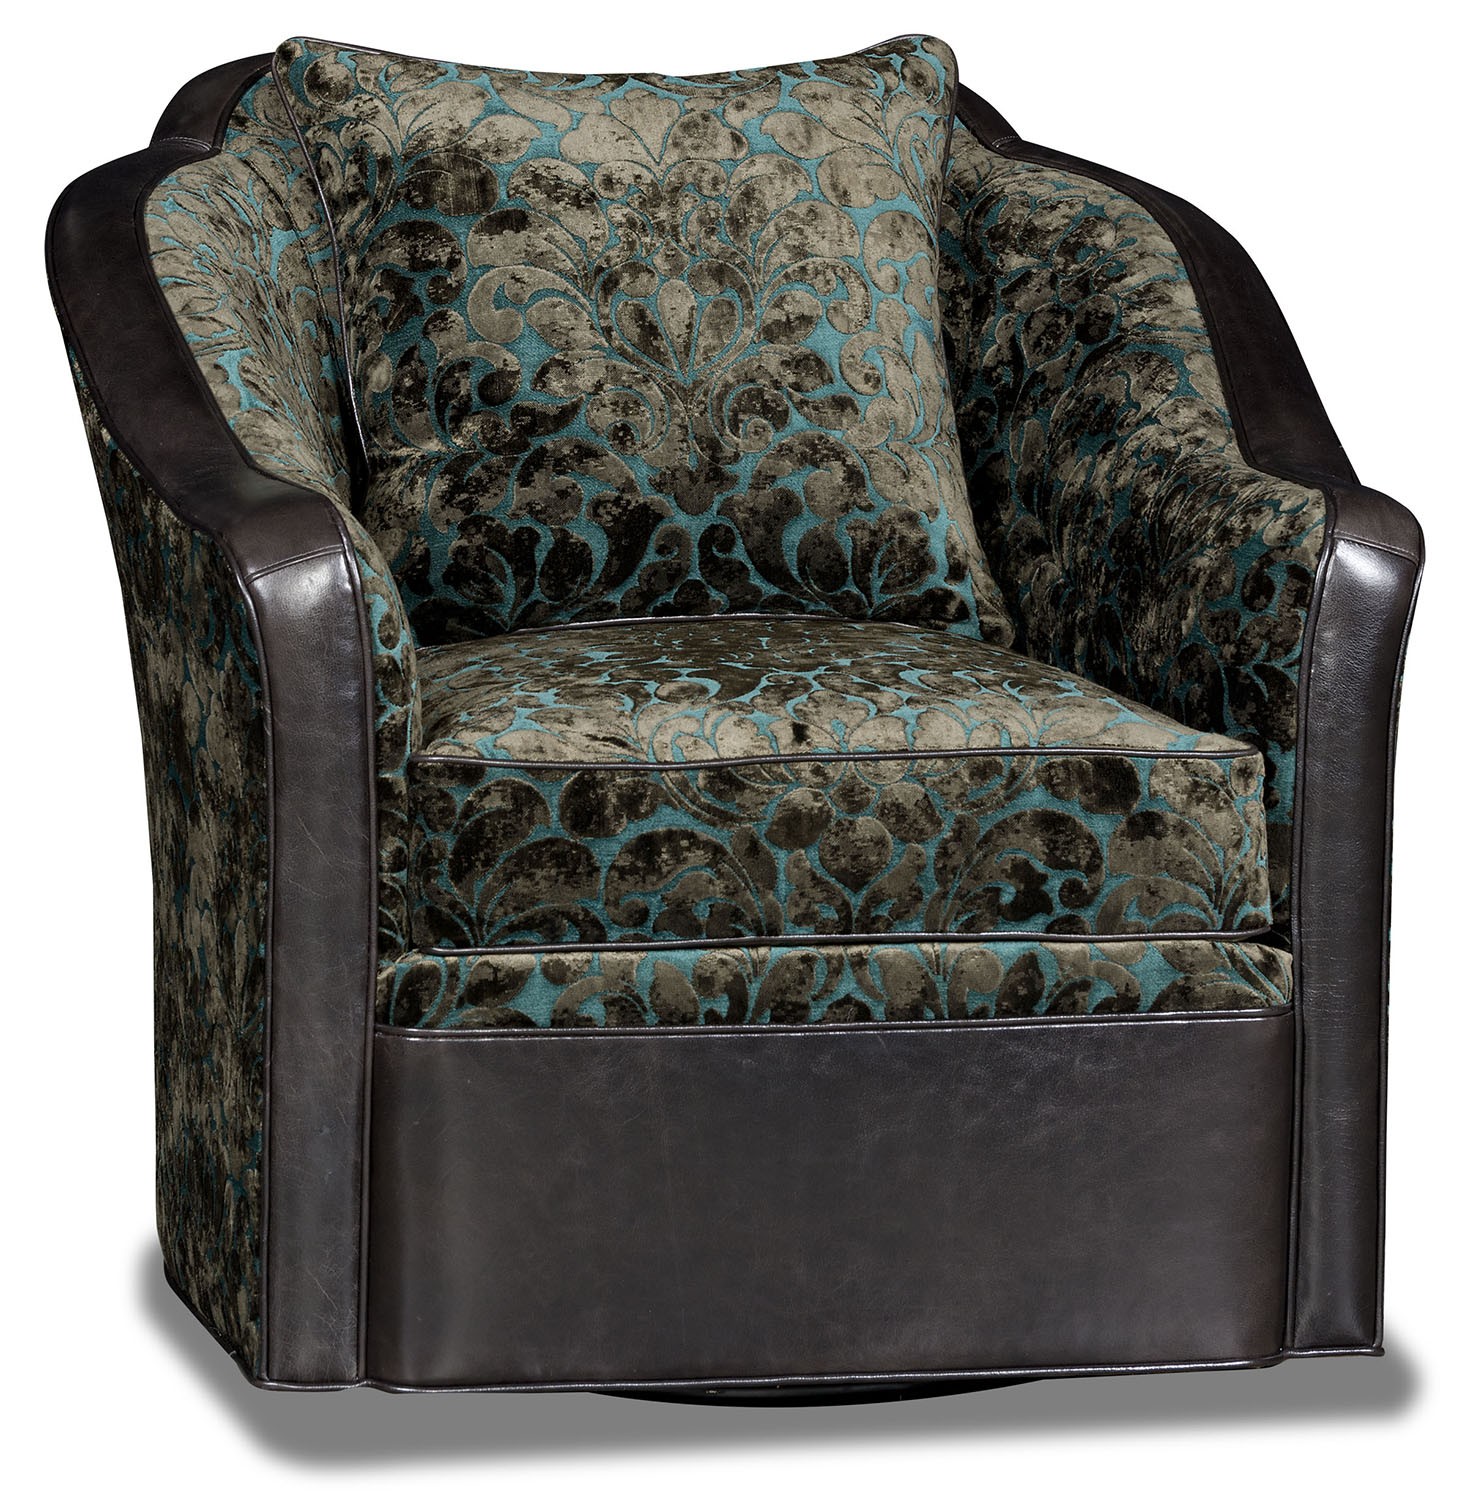 CHAIRS, Leather, Upholstered, Accent Unique dark color swivel chair